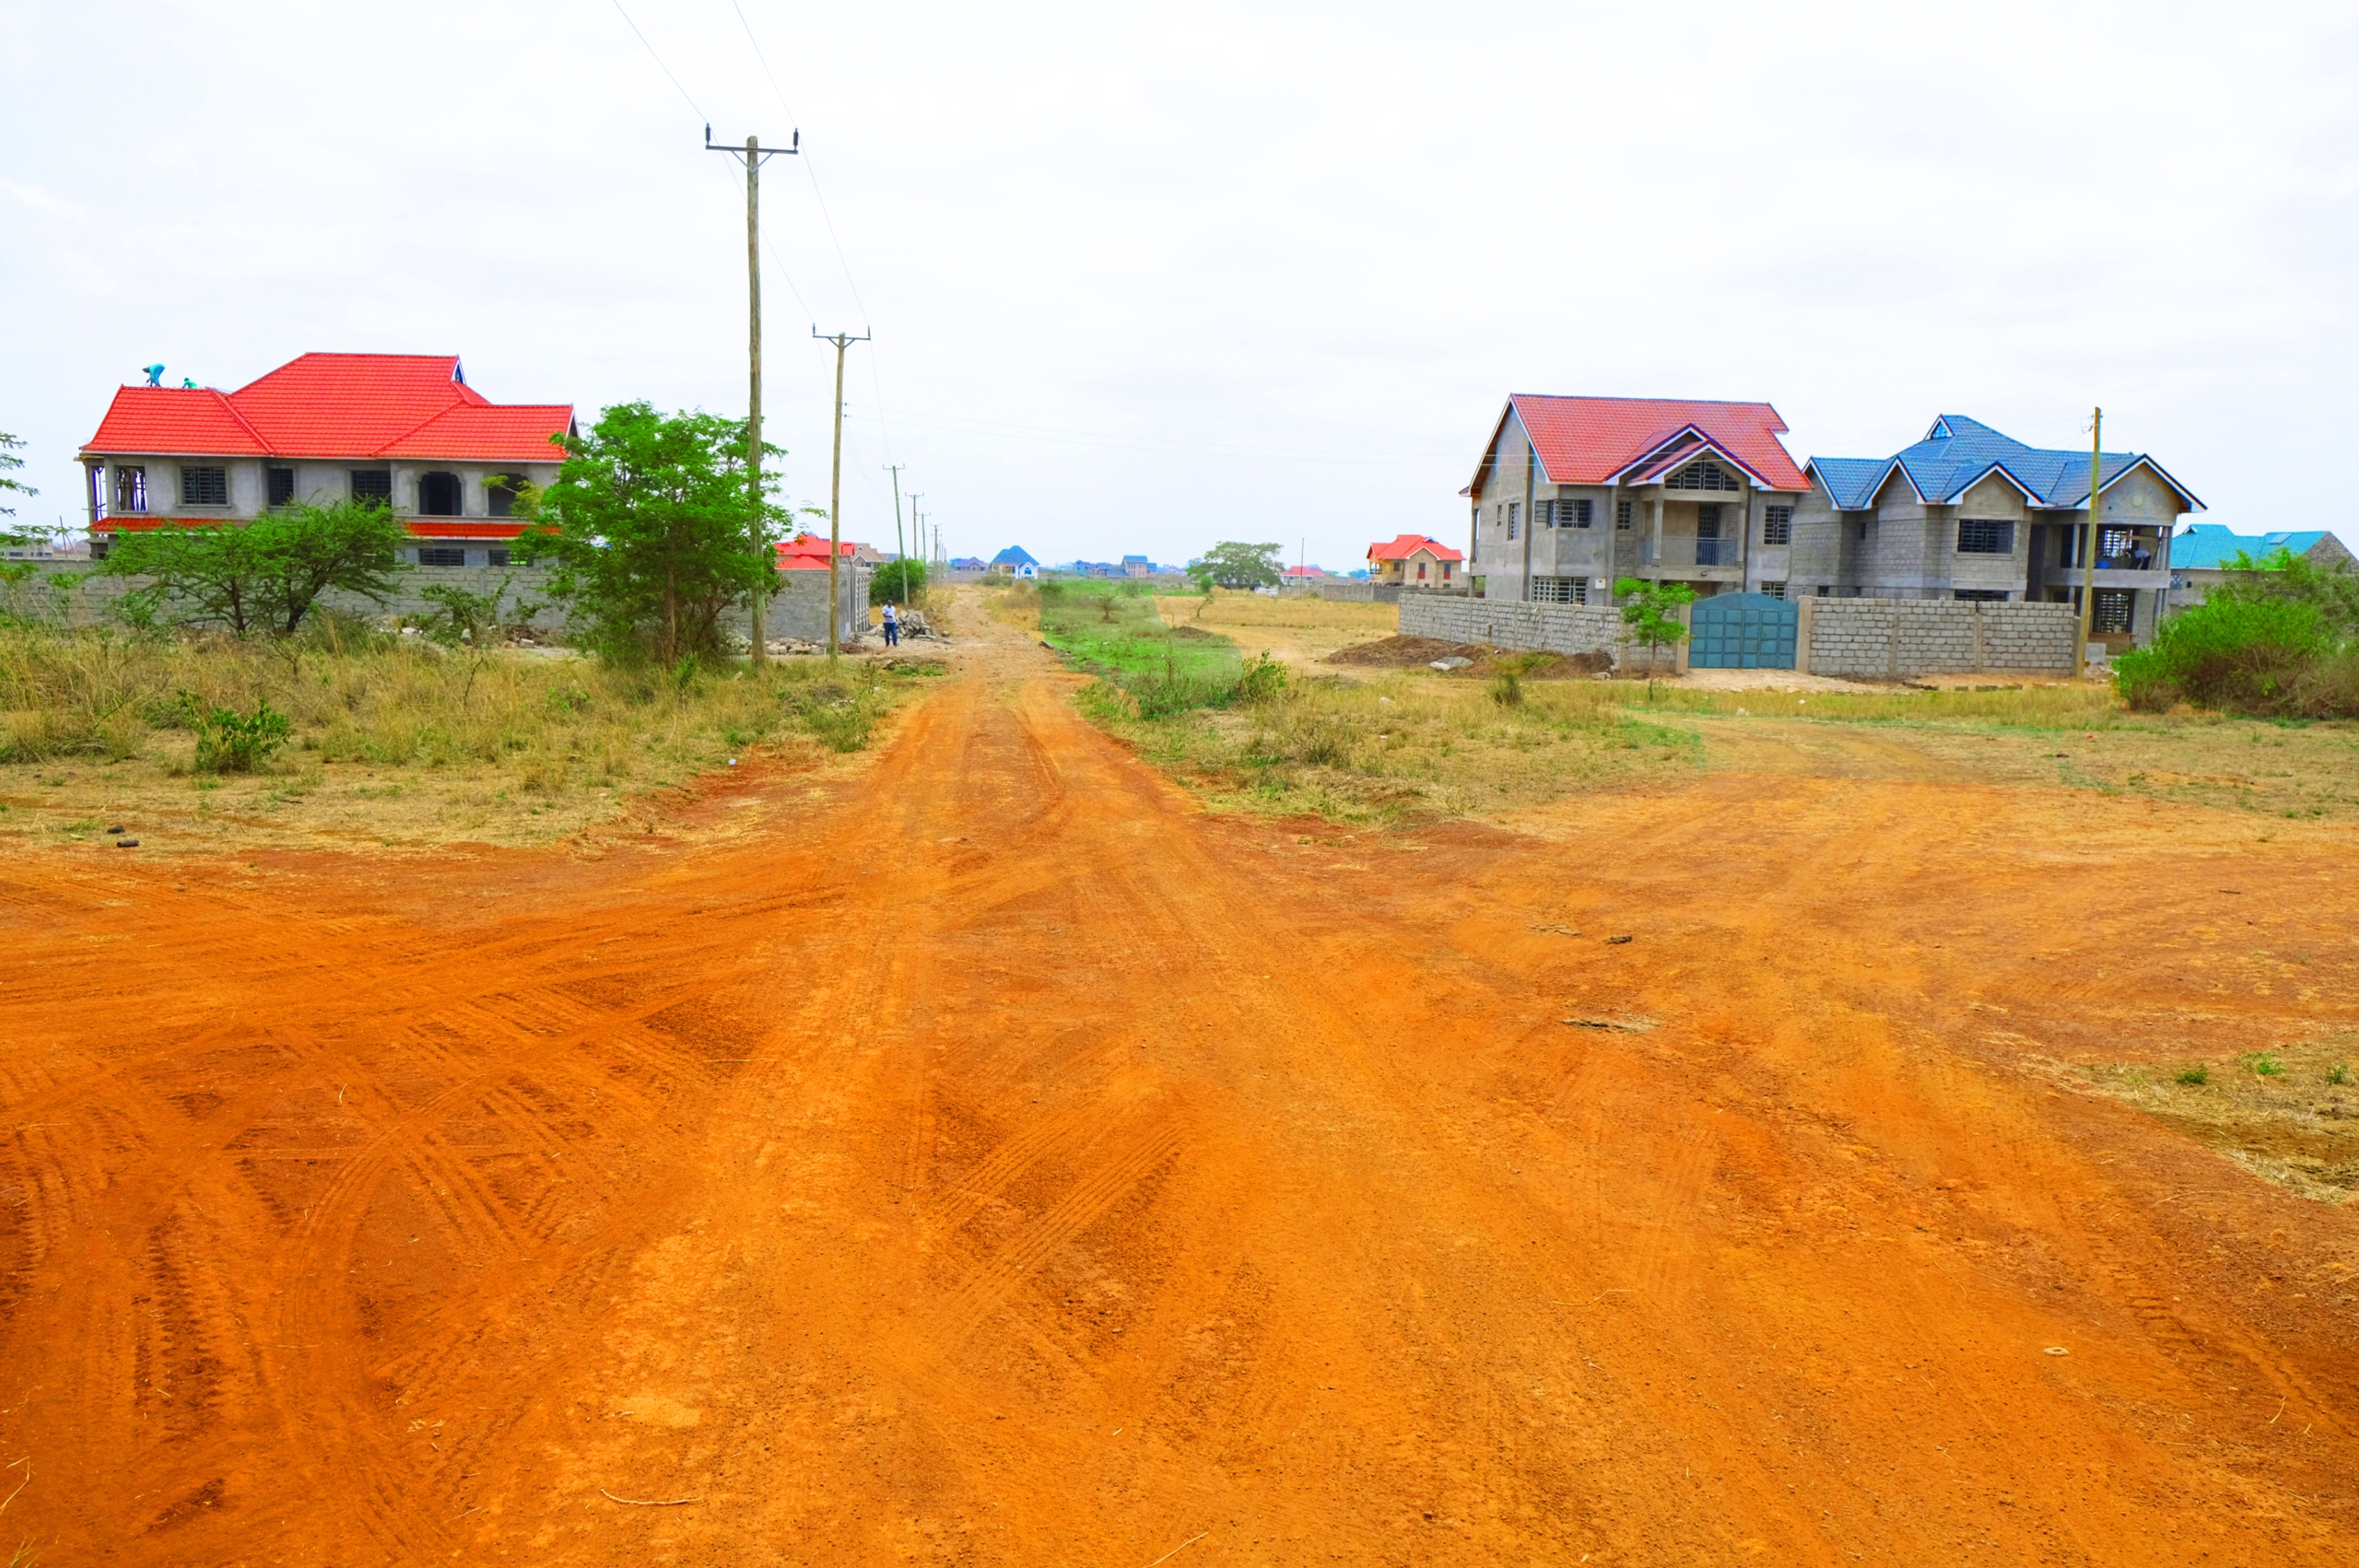 50 by 100 Ngoingwa-Tola Residential Plots